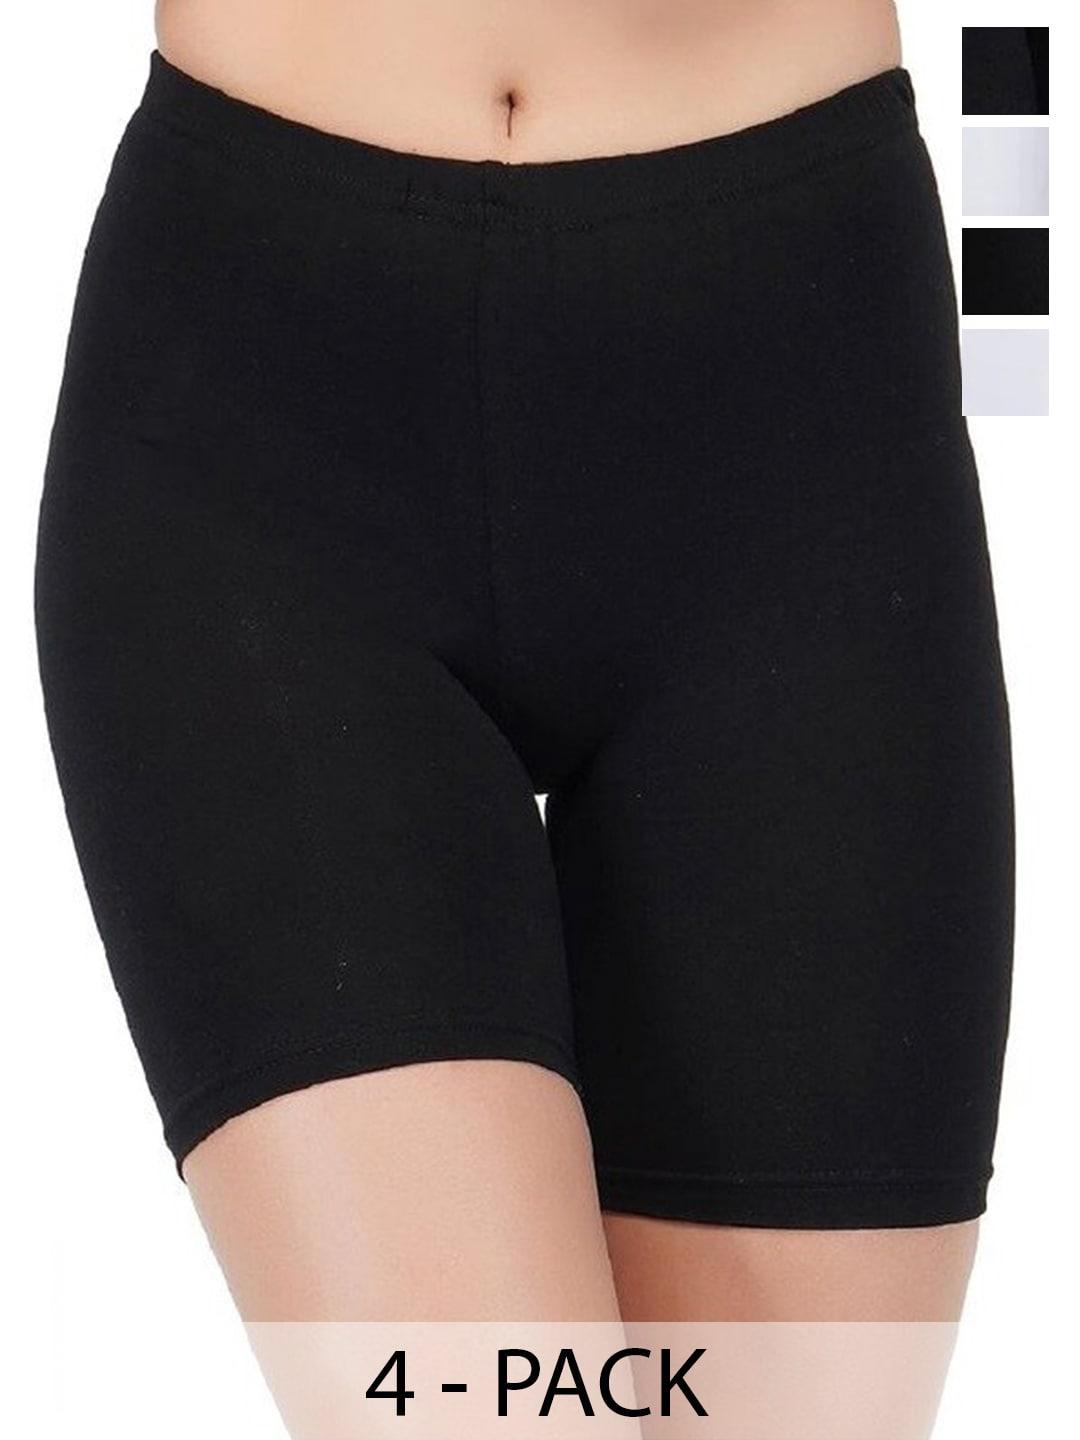 arla apparel pack of 4 underskirt cycling shorts